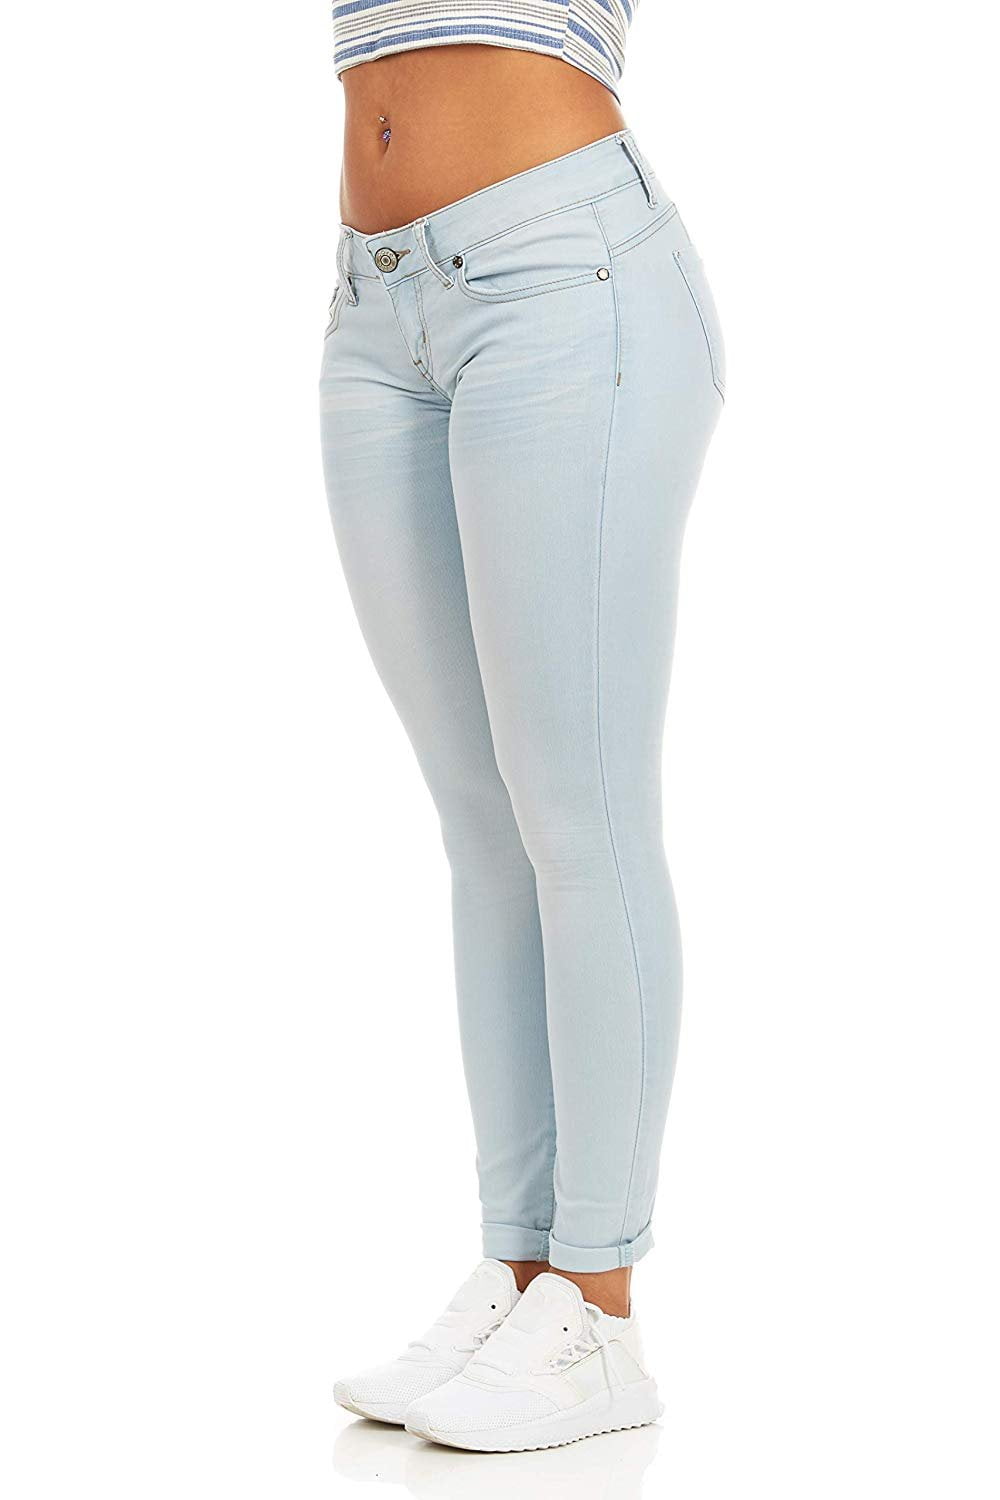 Cover Girl Jeans Juniors Low Rise Waisted Butt Shaping Skinny Whisker ...